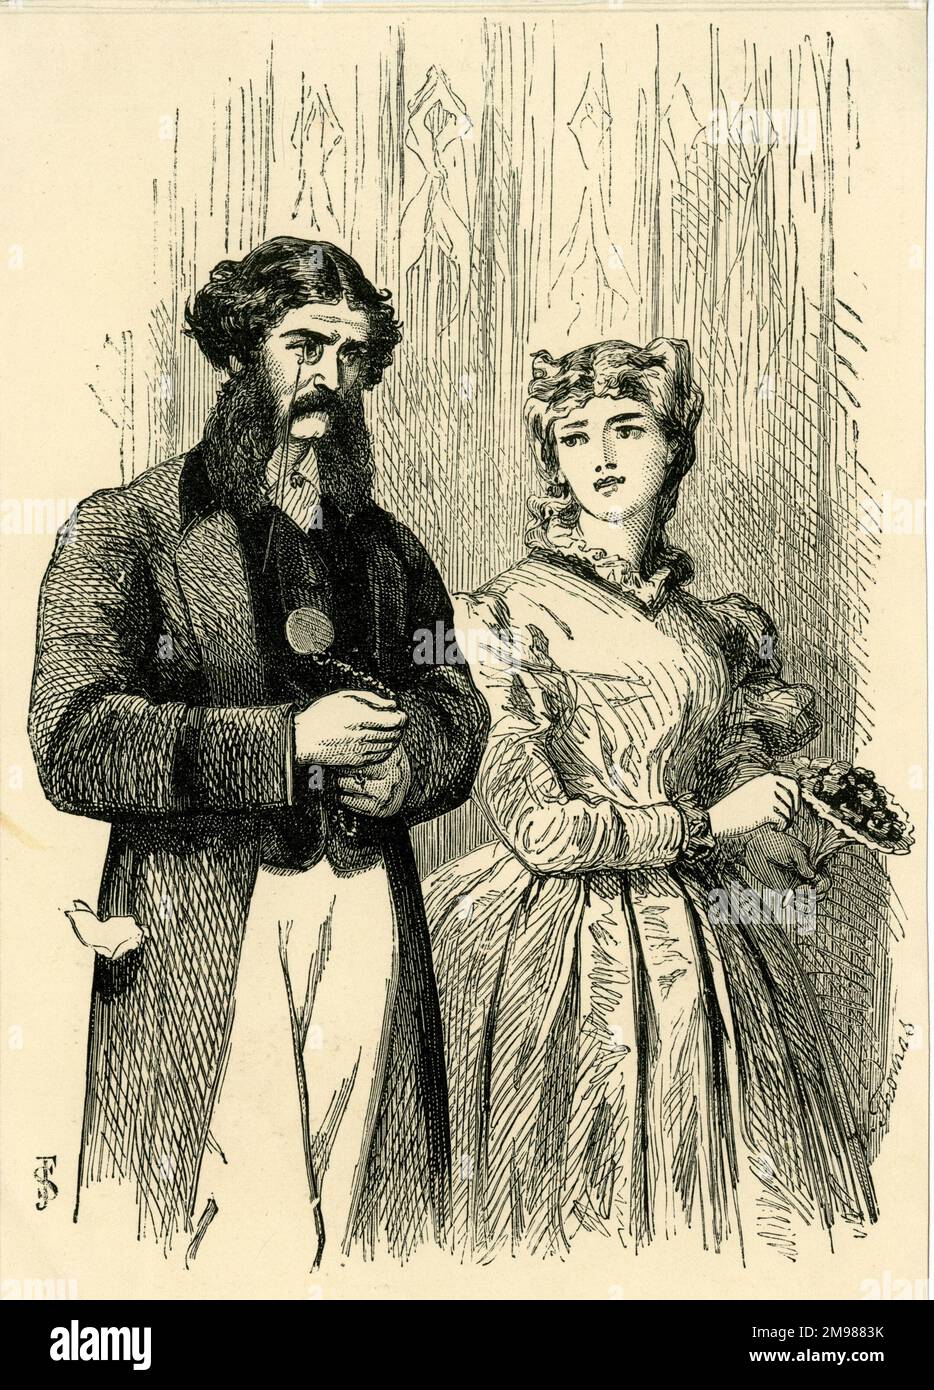 Lord Dundreary proposing - a scene from the play by Tom Taylor, Our American Cousin, first performed in 1858.  The role of this brainless English aristocrat was created on stage by Edward Askew Sothern, on whom this illustration is probably modelled. Stock Photo